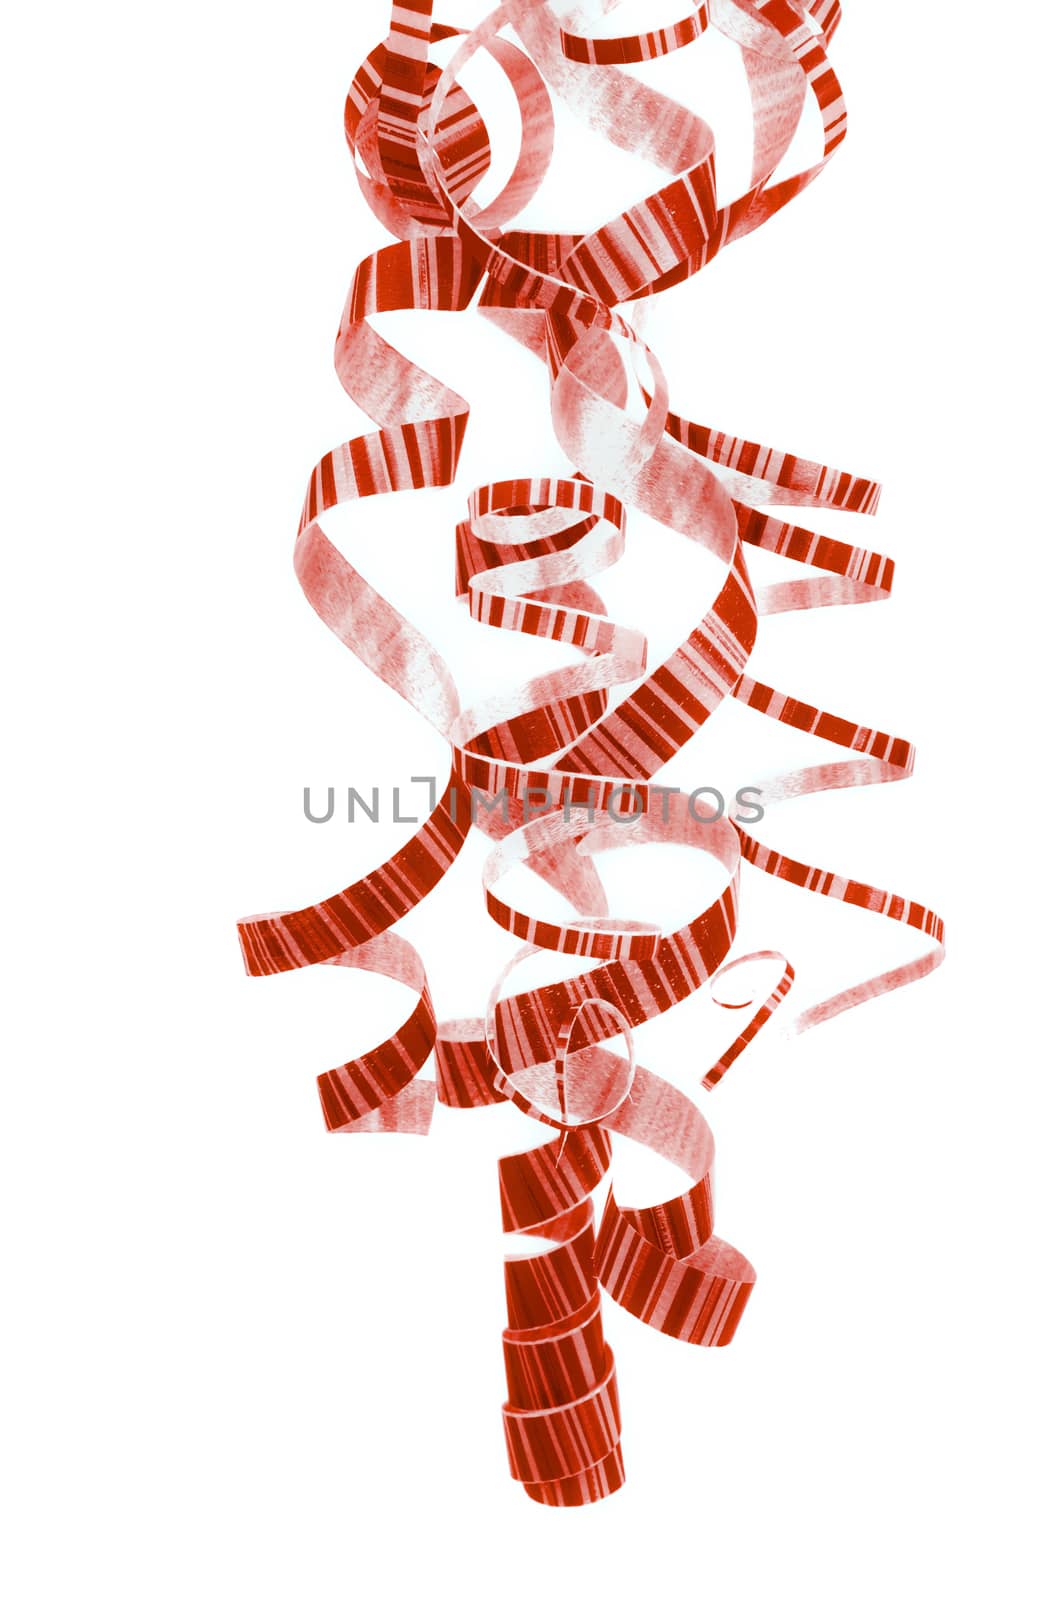 Arrangement of Red Striped Curled Up Hanging Party Streamers isolated on White background